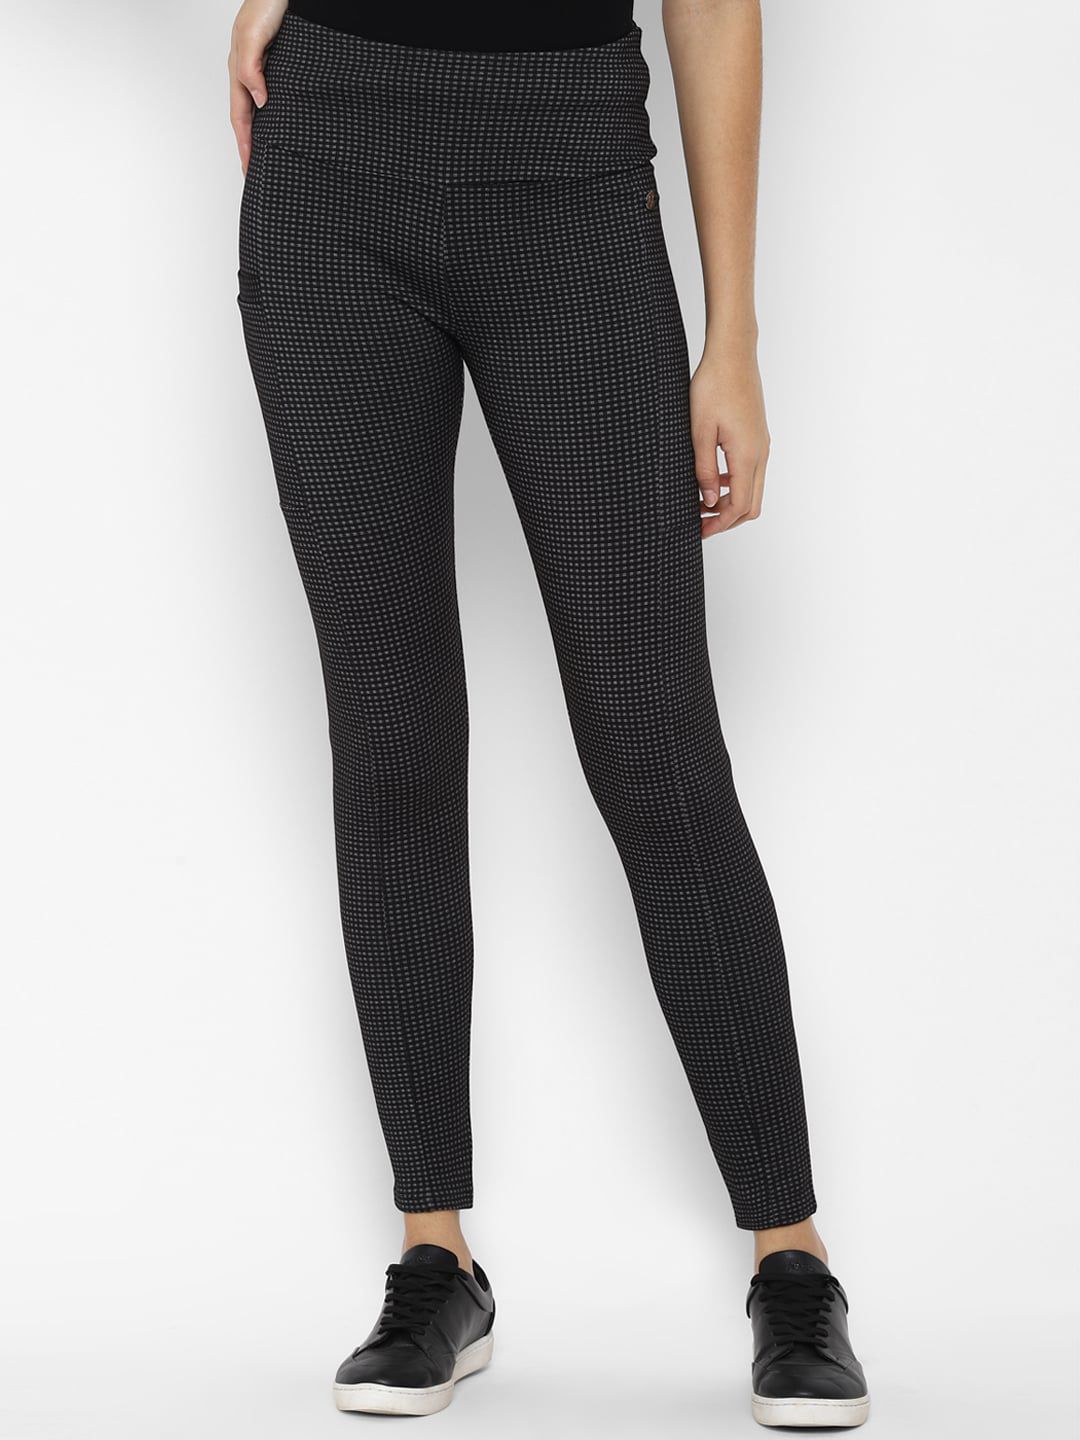 Allen Solly Woman Black Self-Design Trousers Price in India